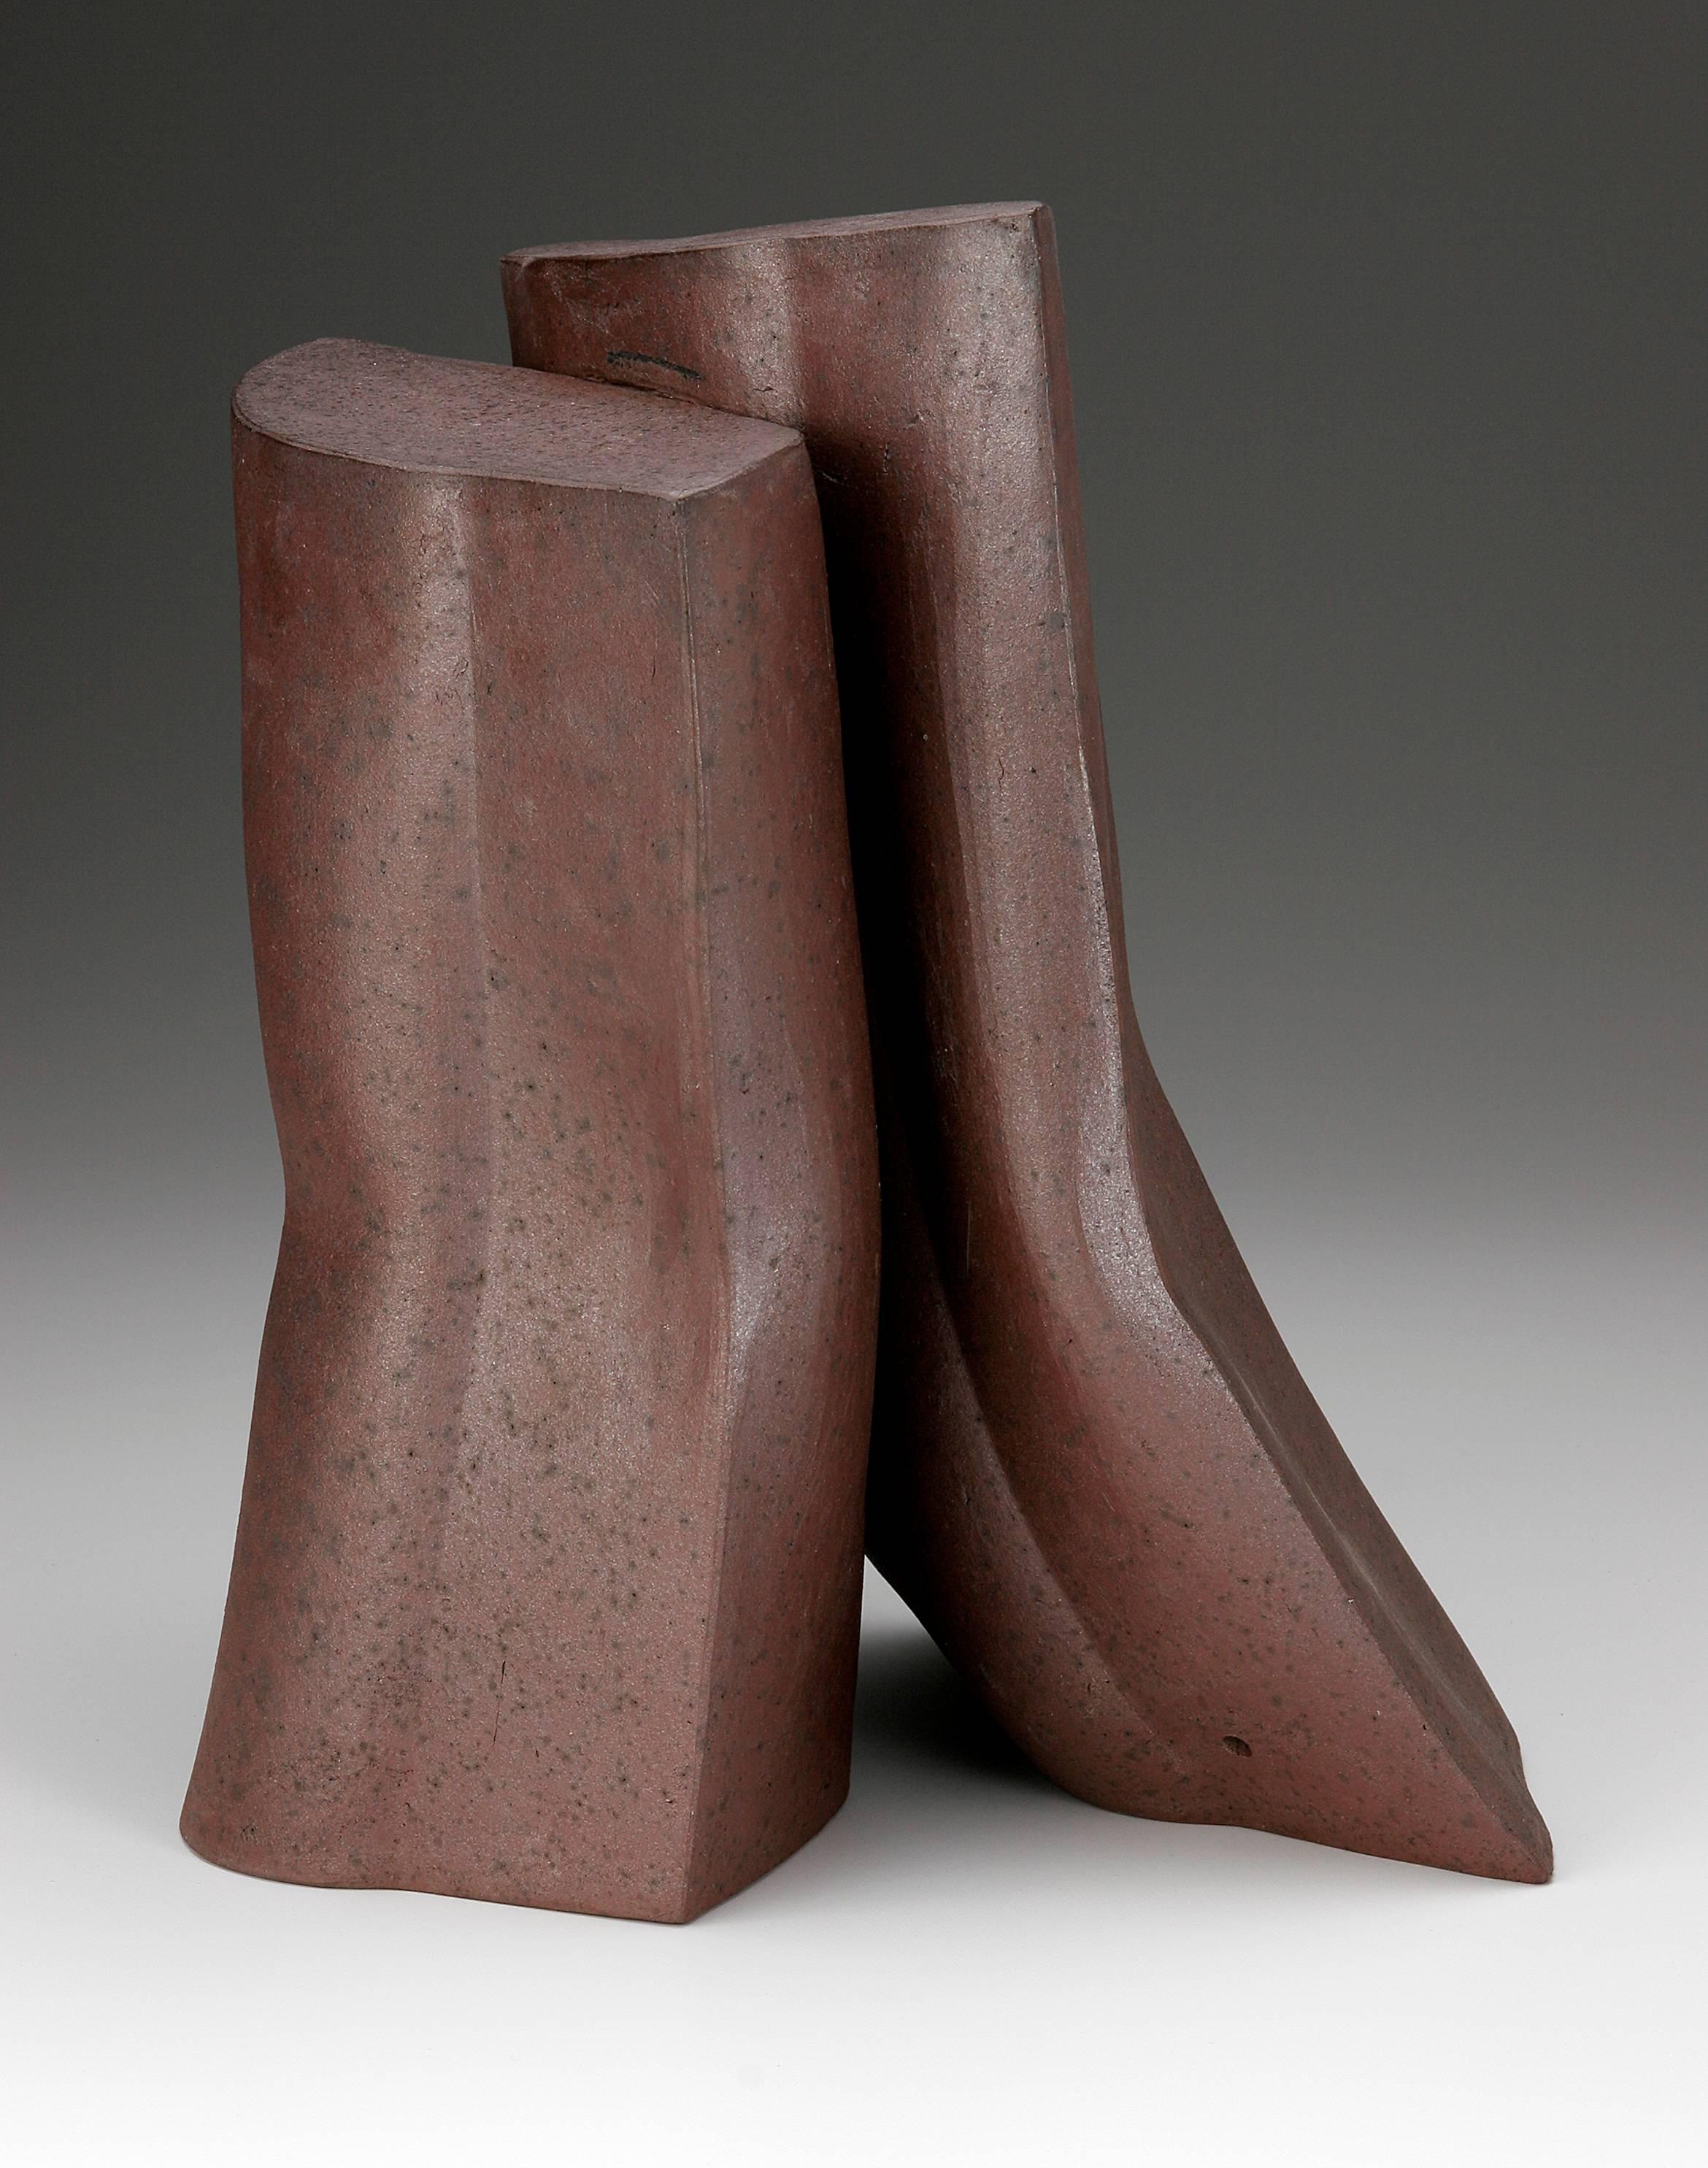 Malcolm Wright Abstract Sculpture - Two Leaning Forms